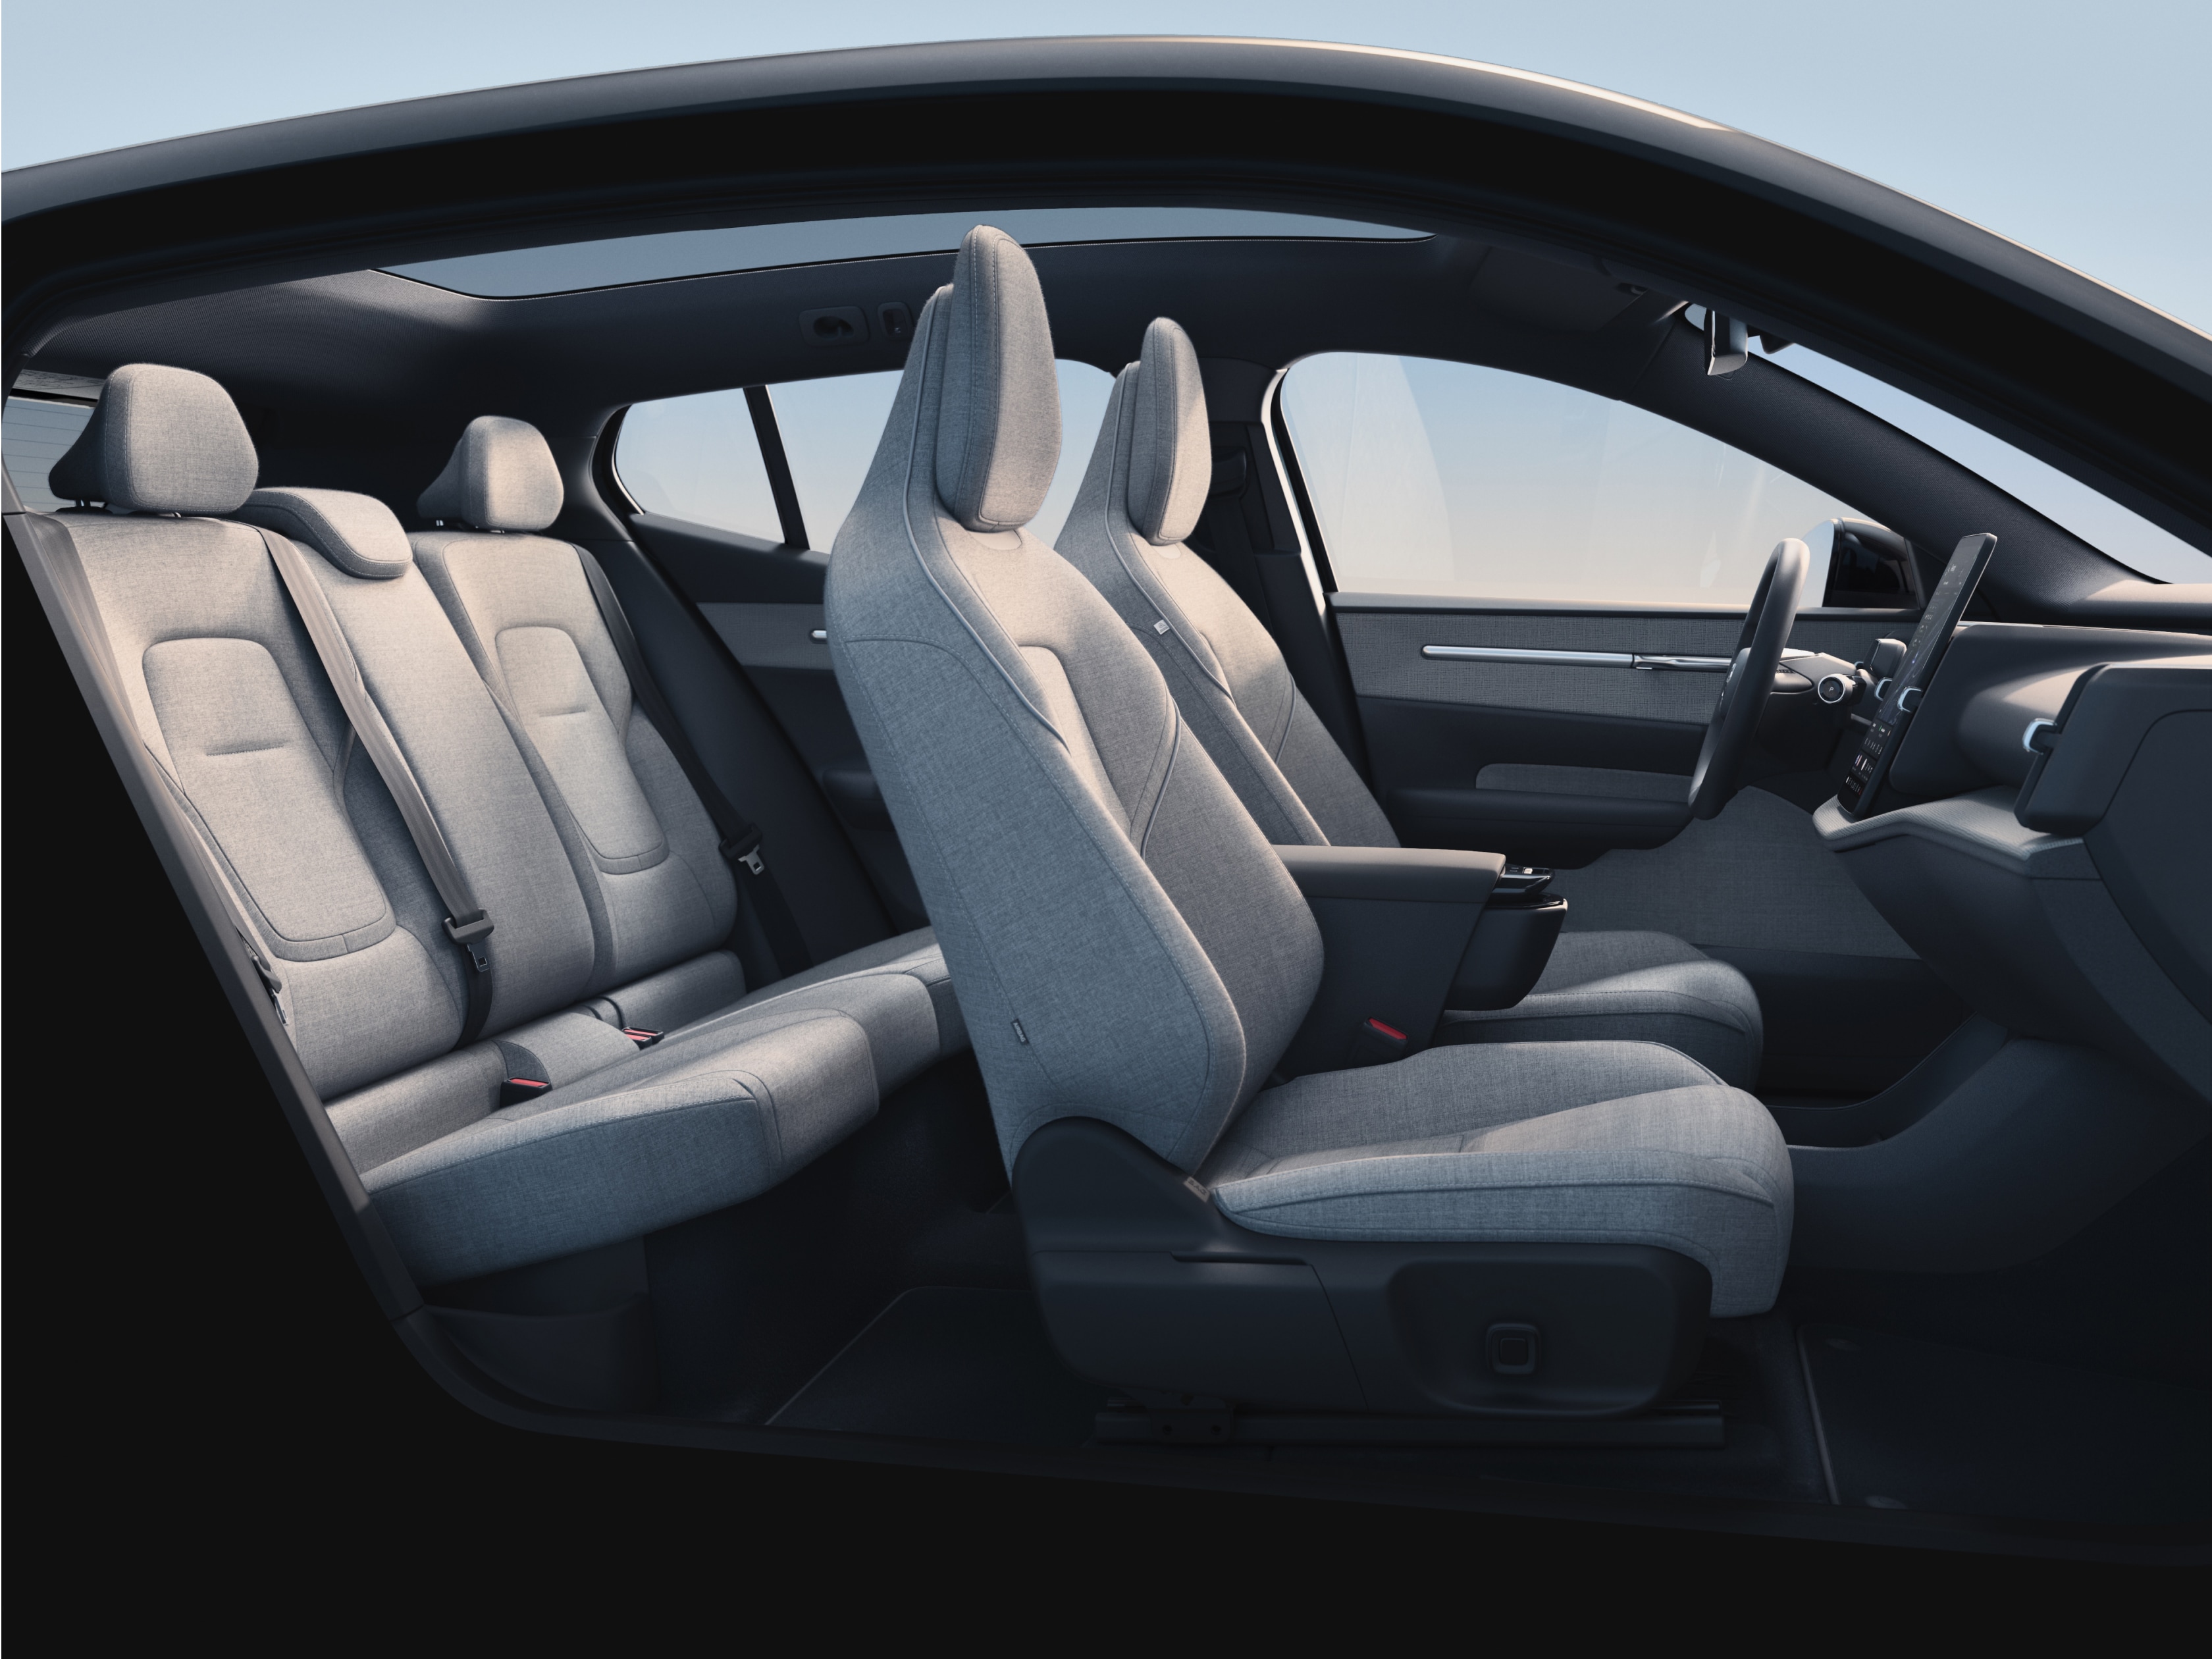 The 5-seat cabin of the Volvo EX30 in an interior design theme called Mist.